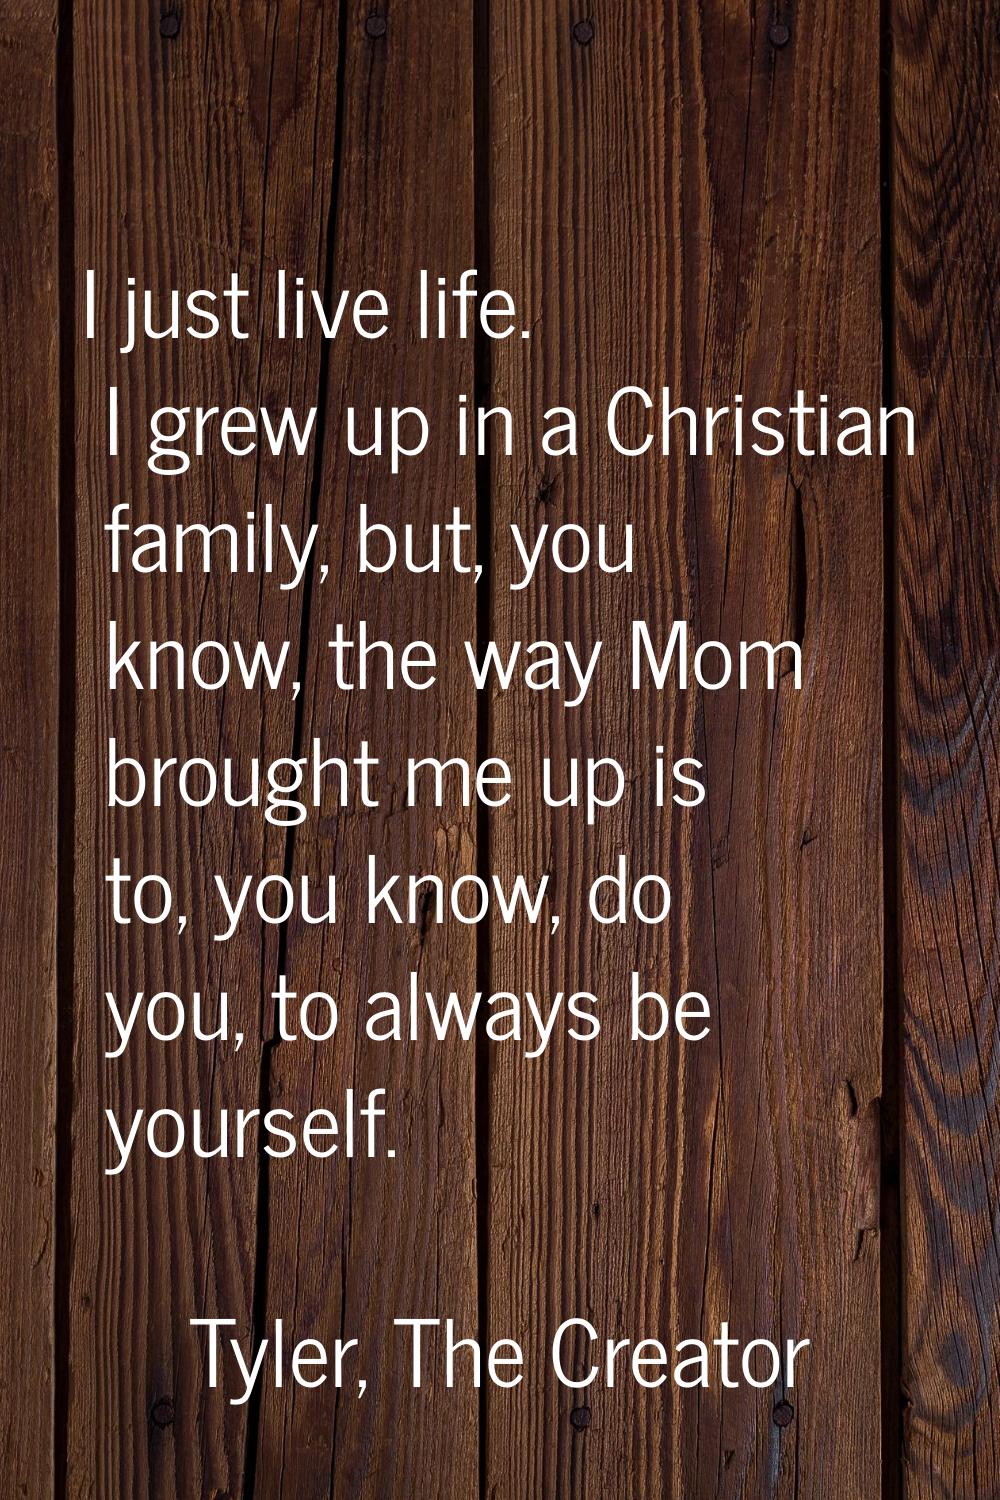 I just live life. I grew up in a Christian family, but, you know, the way Mom brought me up is to, 